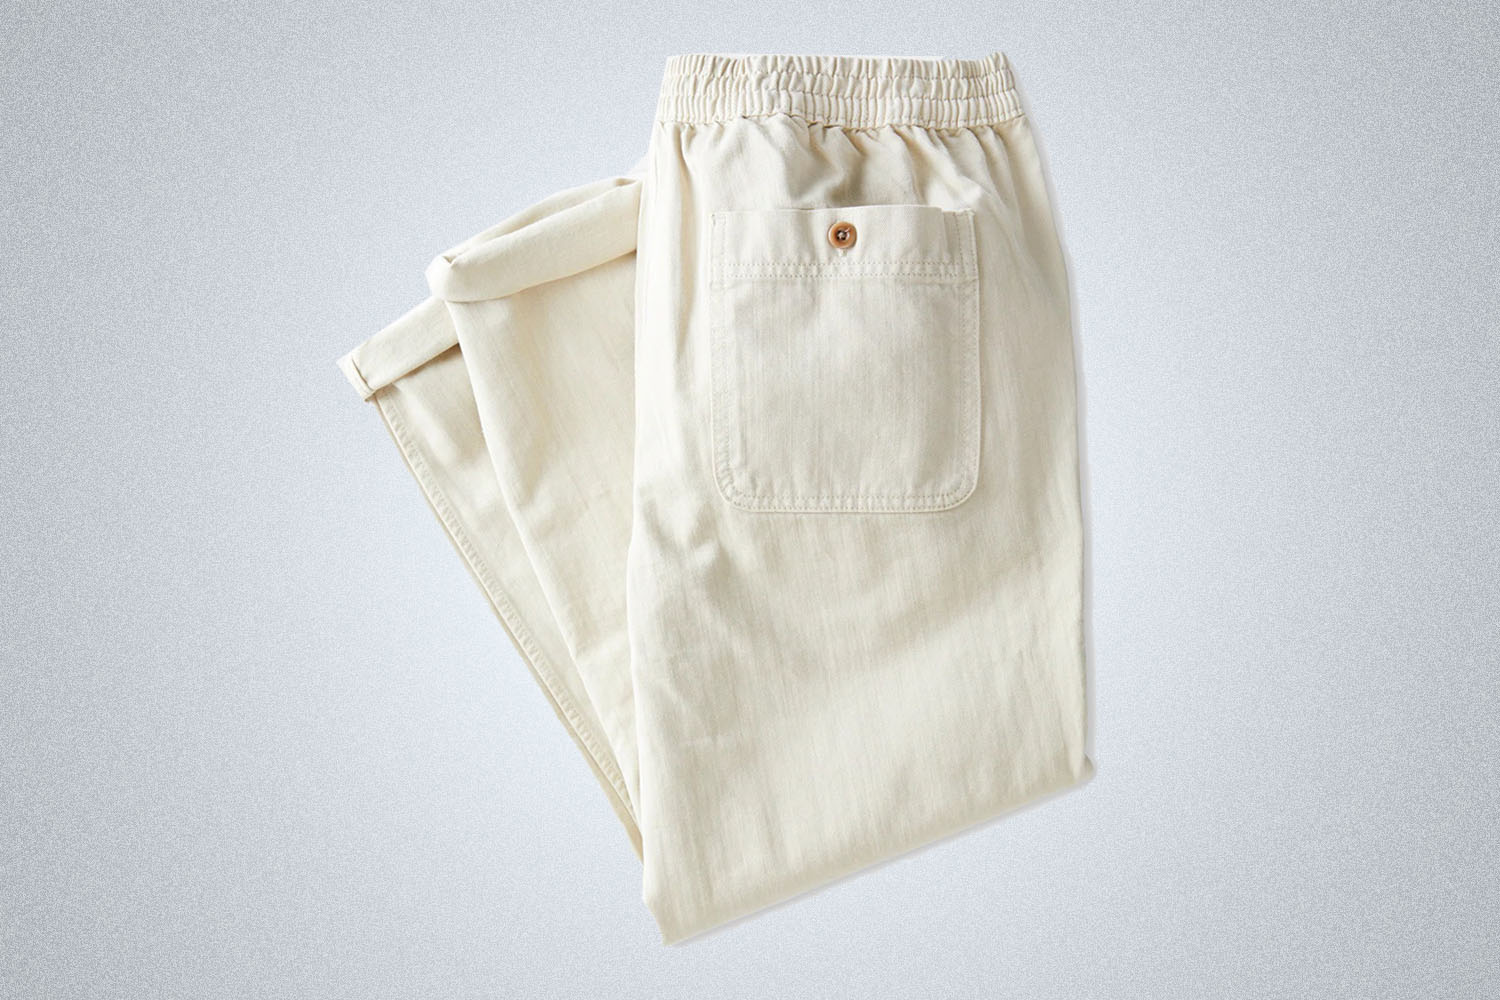 A pair of white beach pants from Outerknown